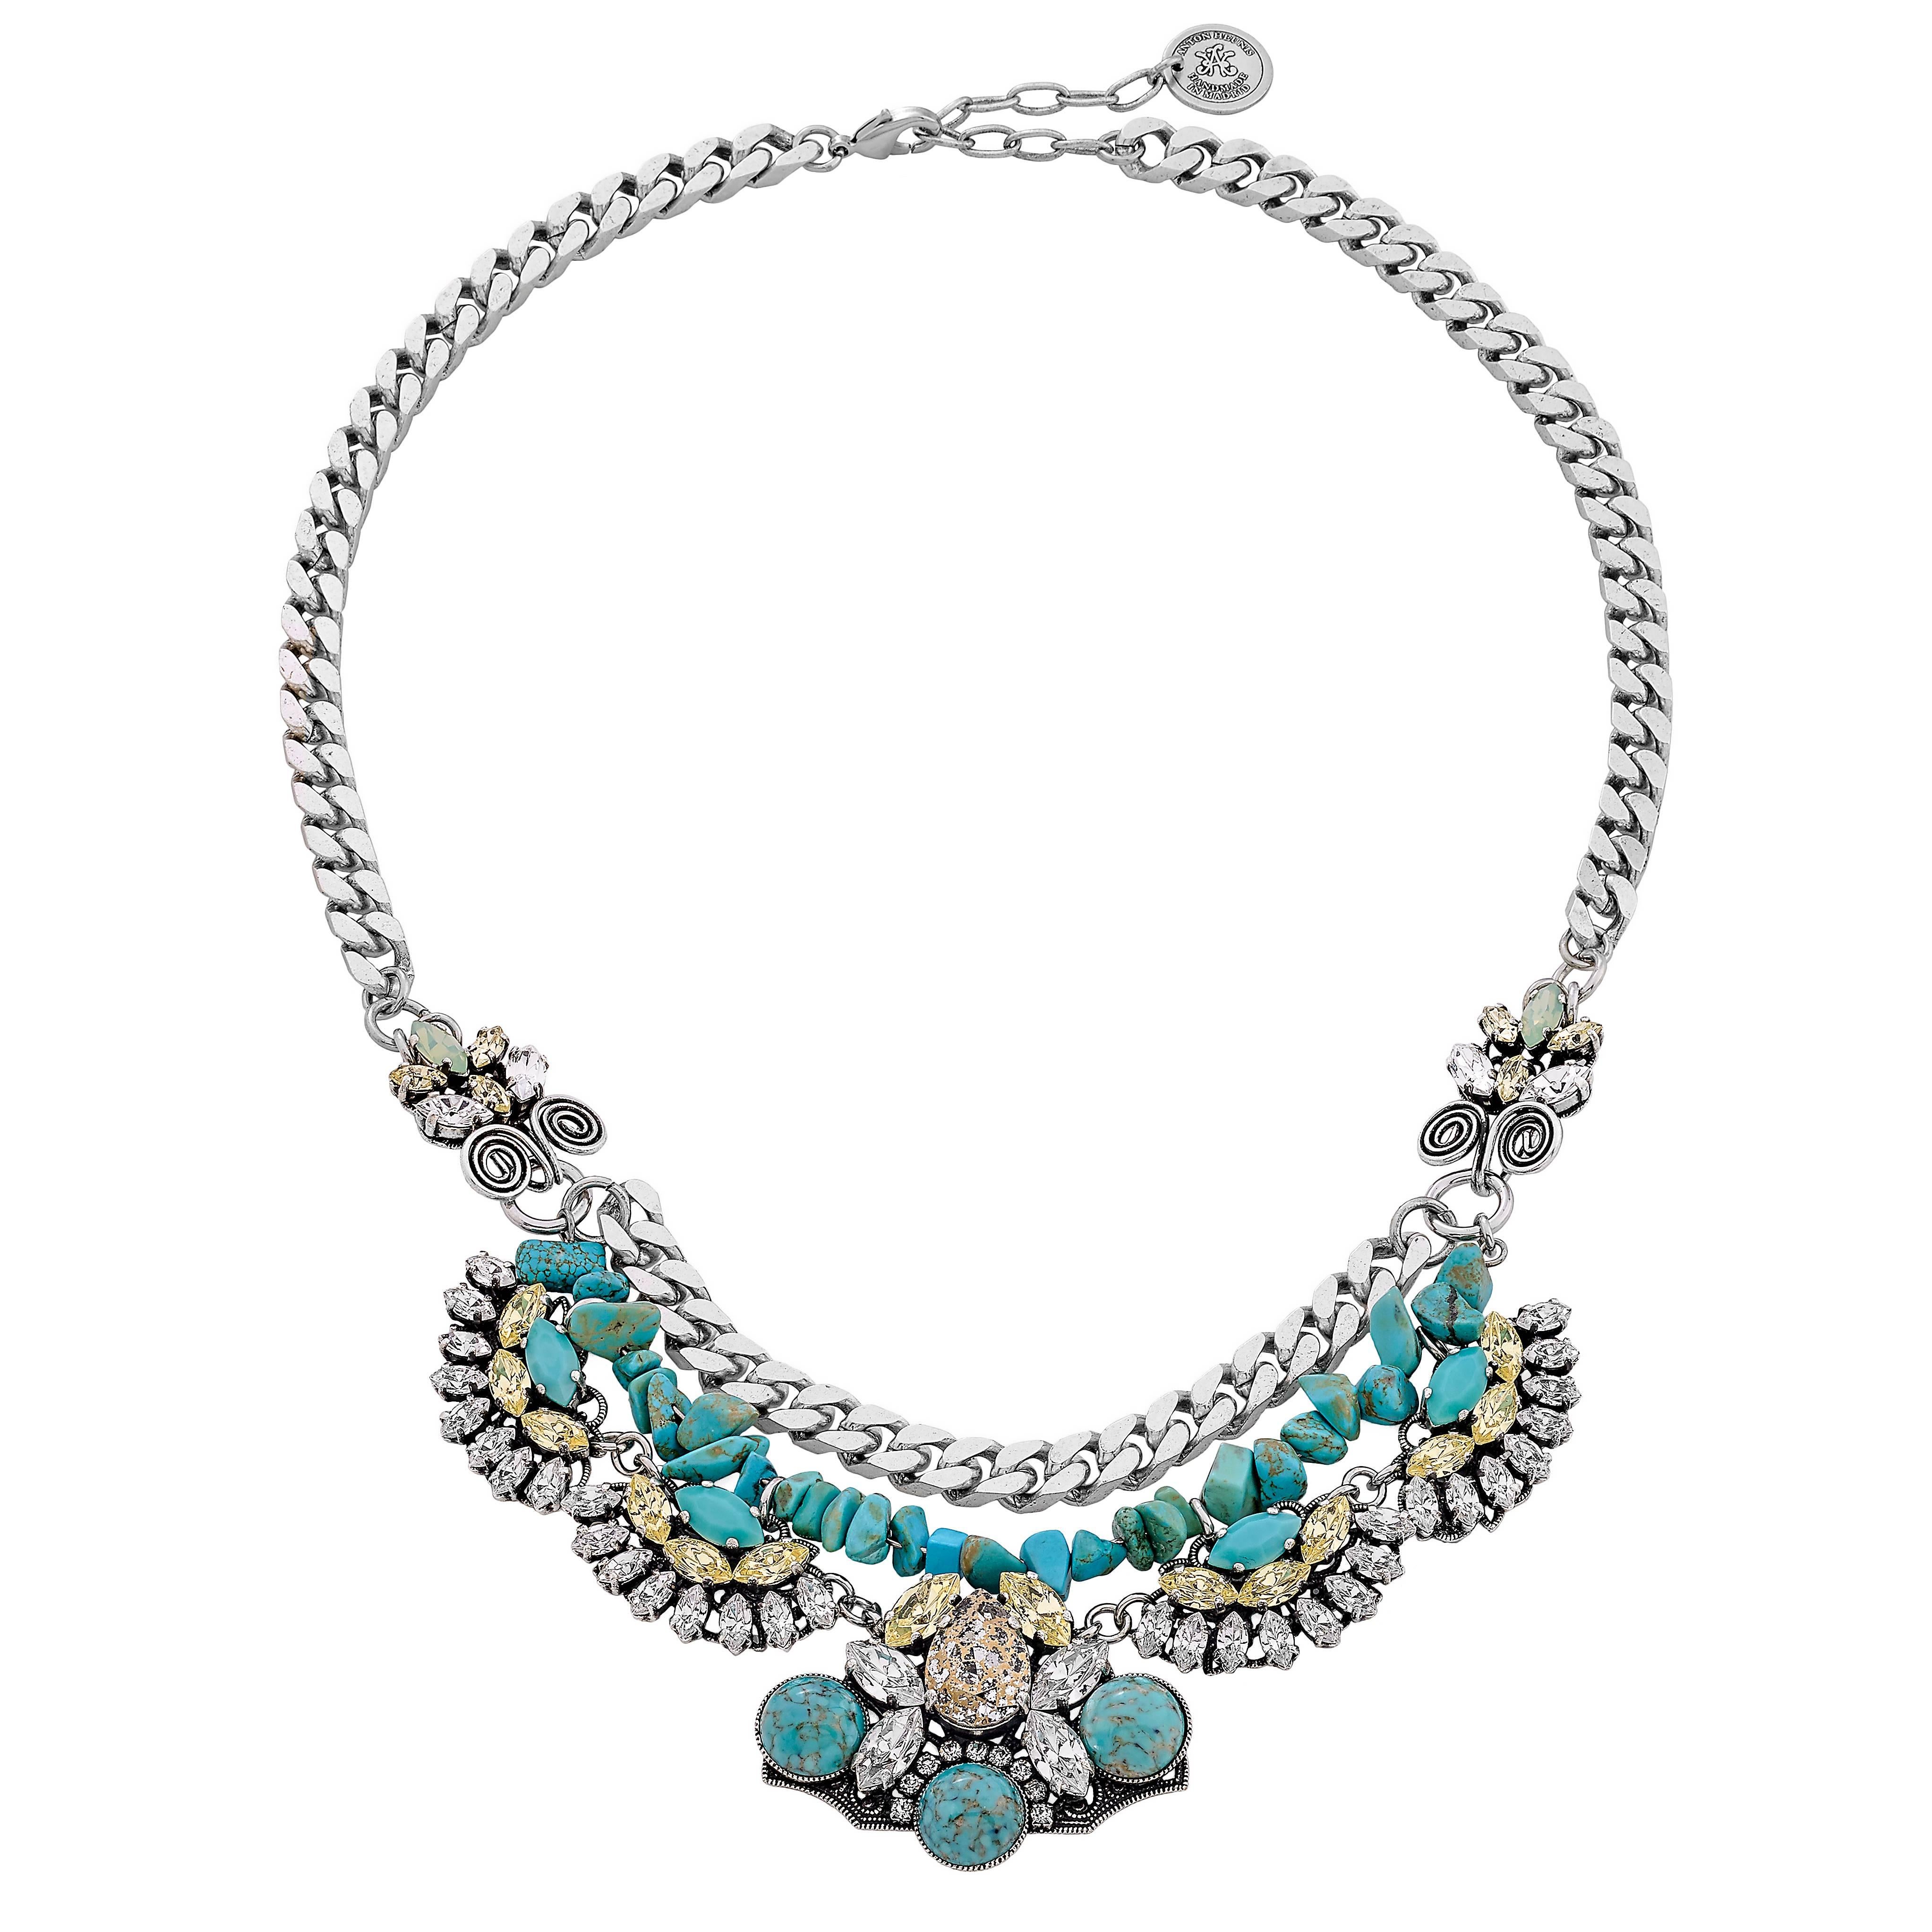  Anton Heunis Turquoise Necklace For Sale